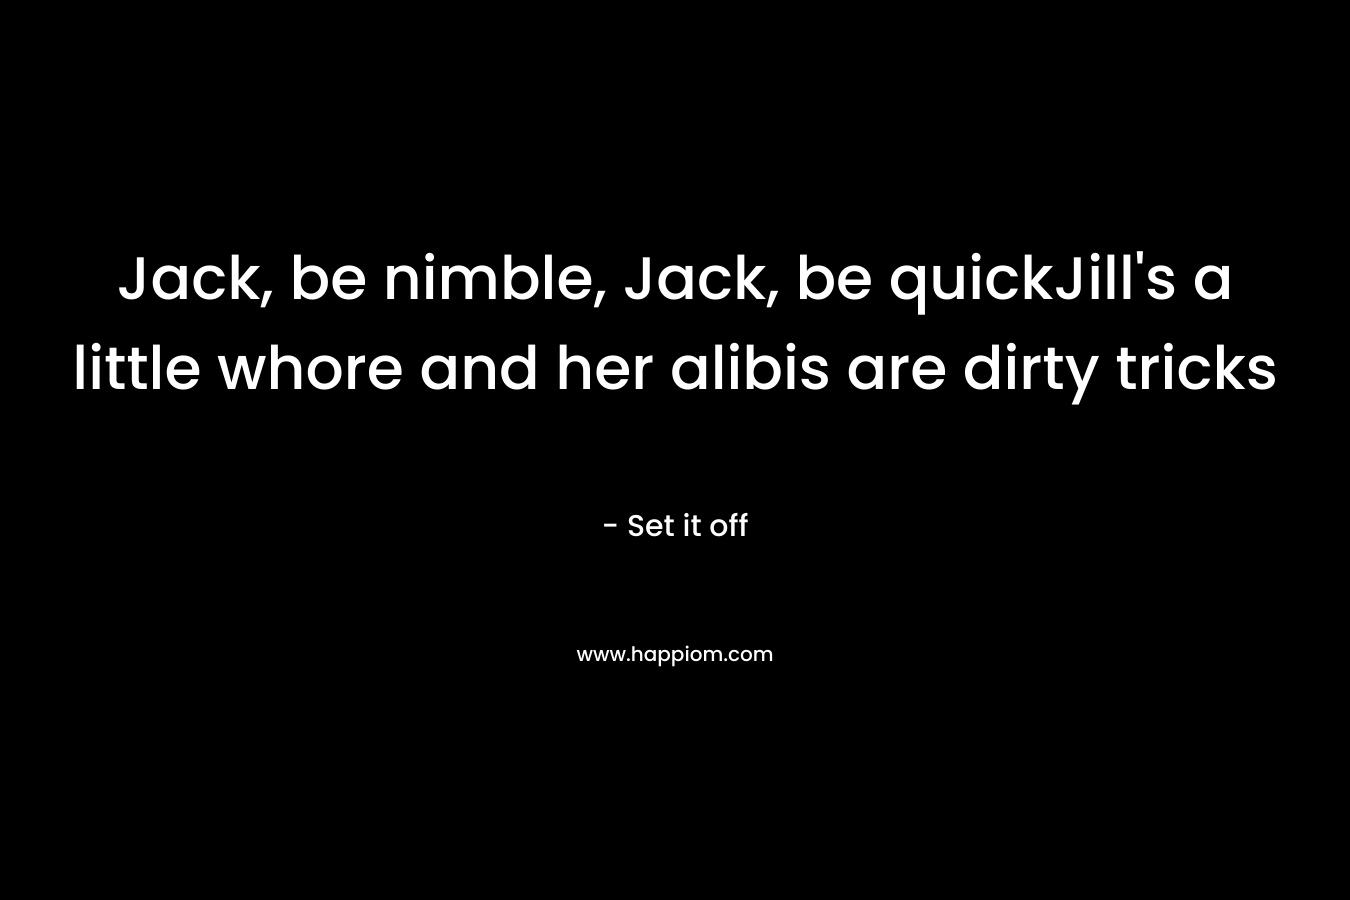 Jack, be nimble, Jack, be quickJill's a little whore and her alibis are dirty tricks